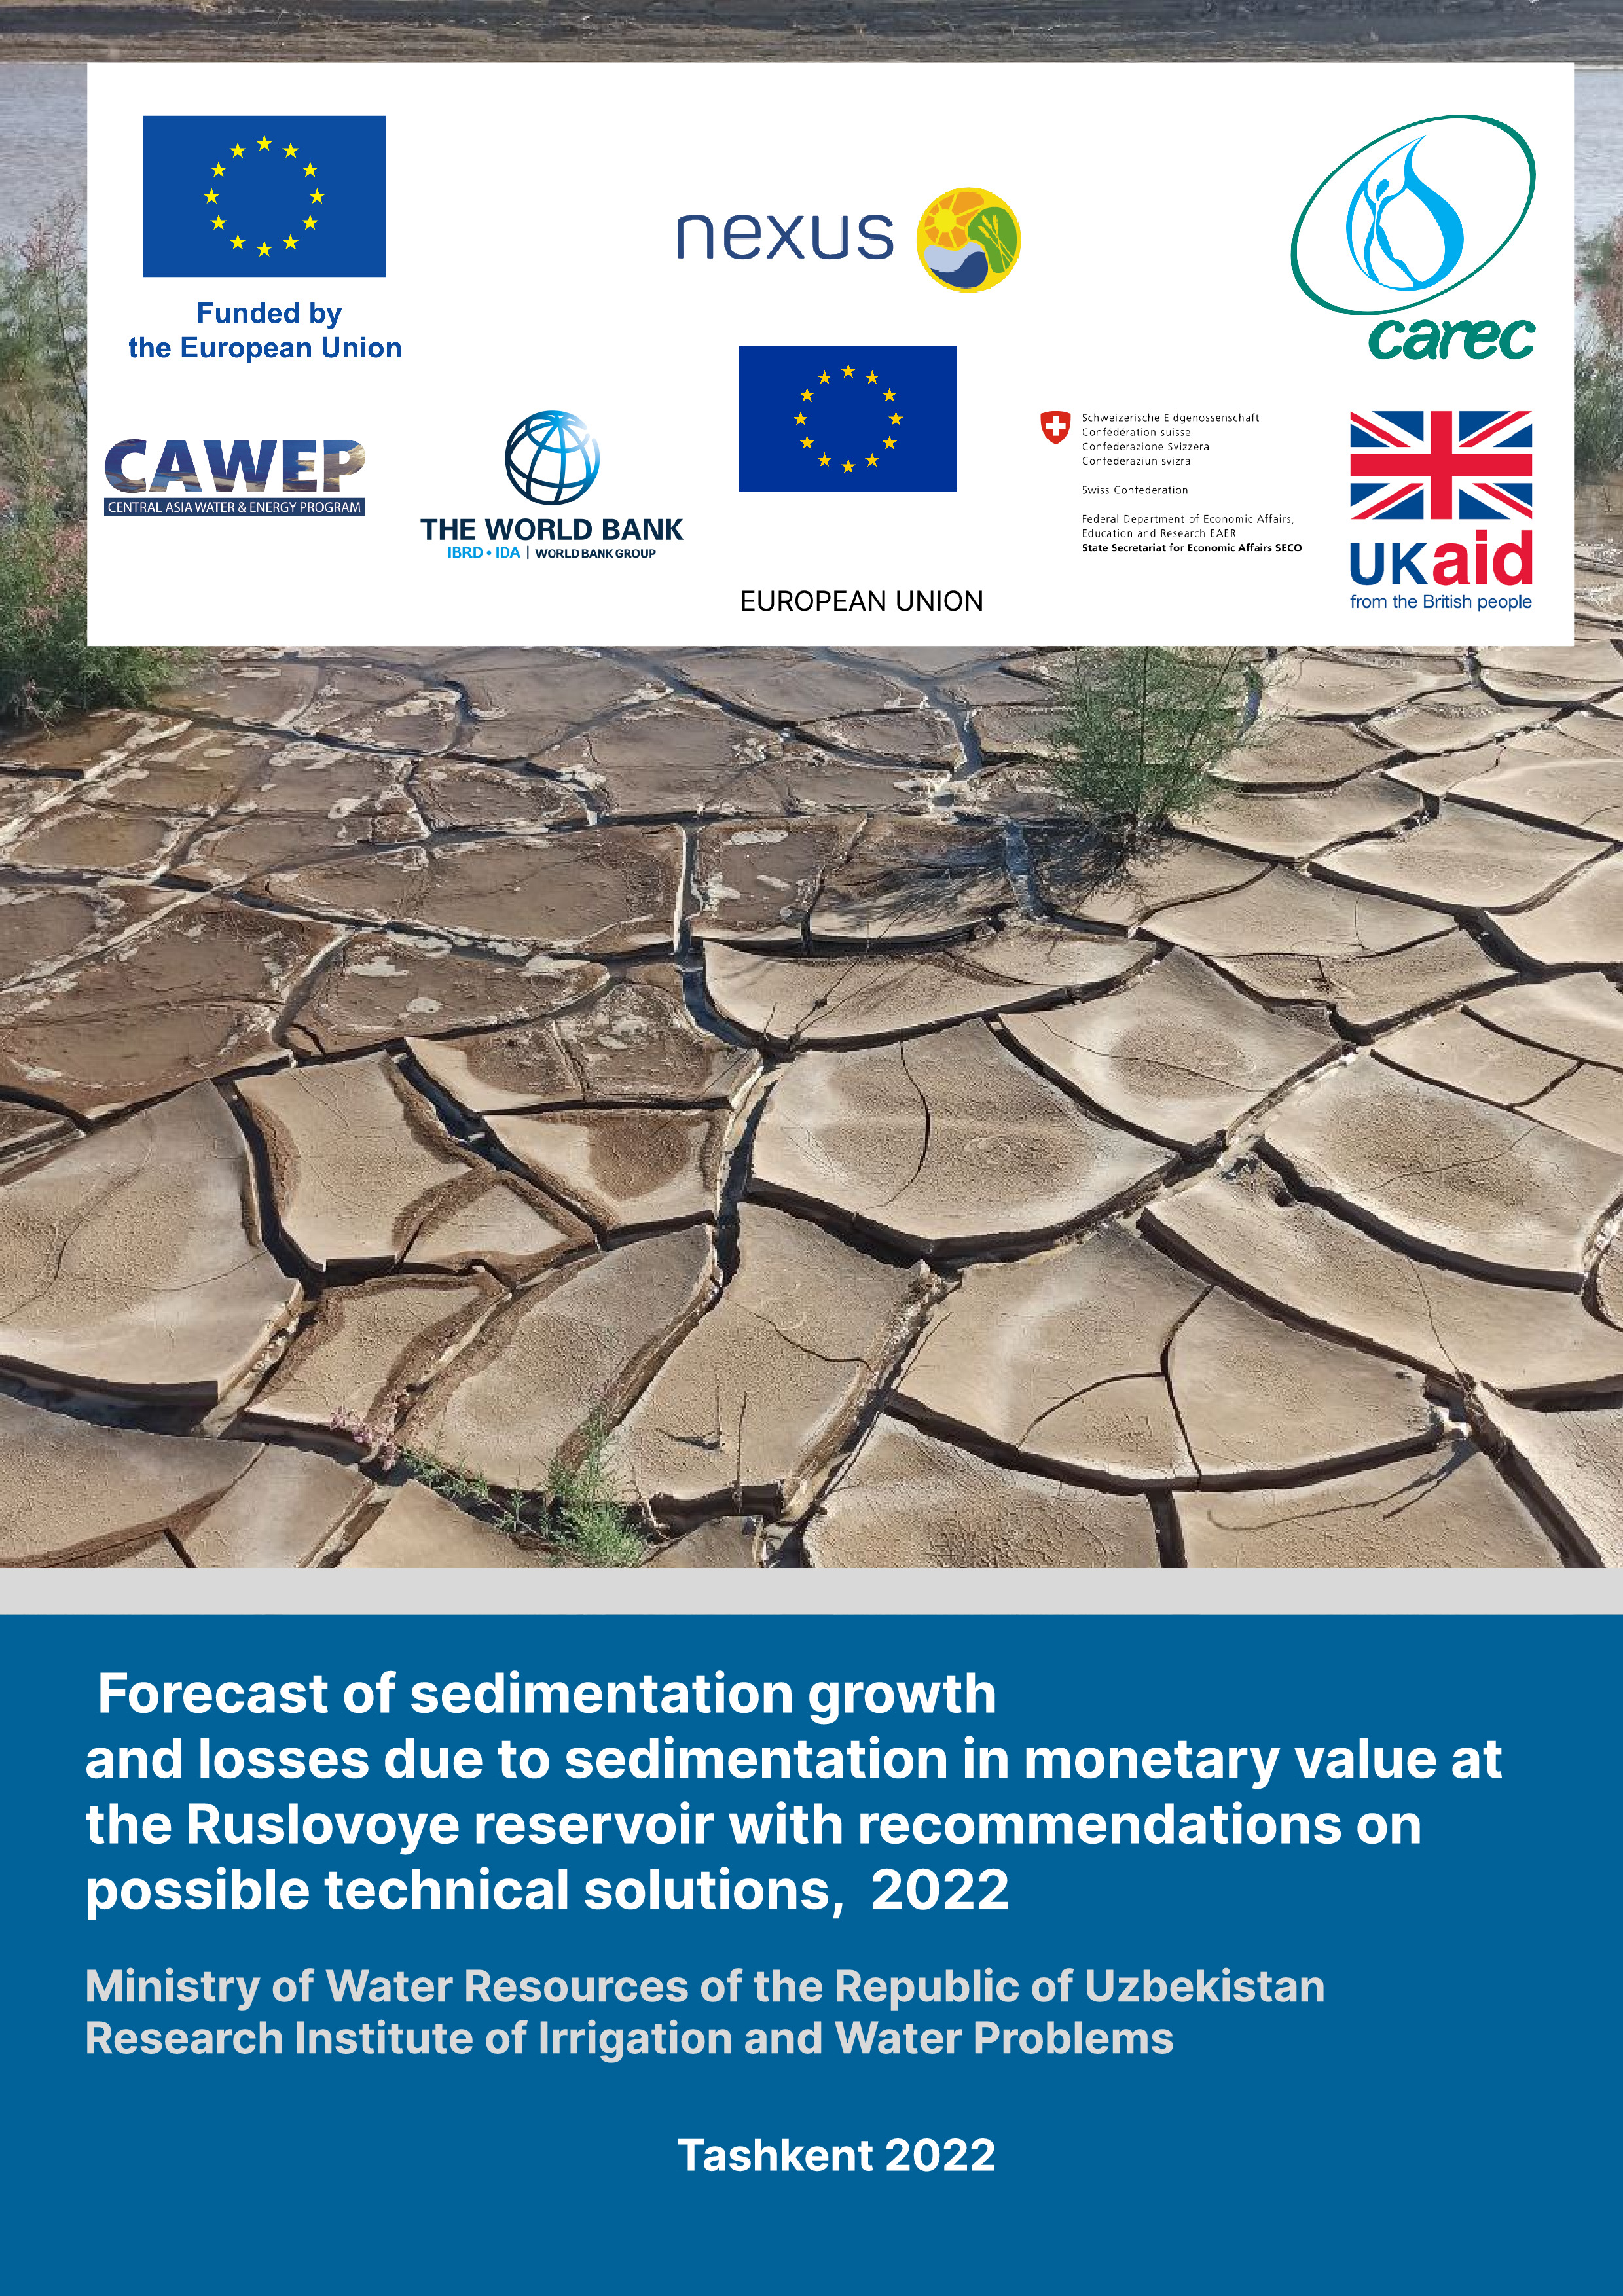 Forecast of sedimentation growth and losses due to sedimentation in monetary value at the Ruslovoye reservoir with recommendations on possible technical solutions, 2022